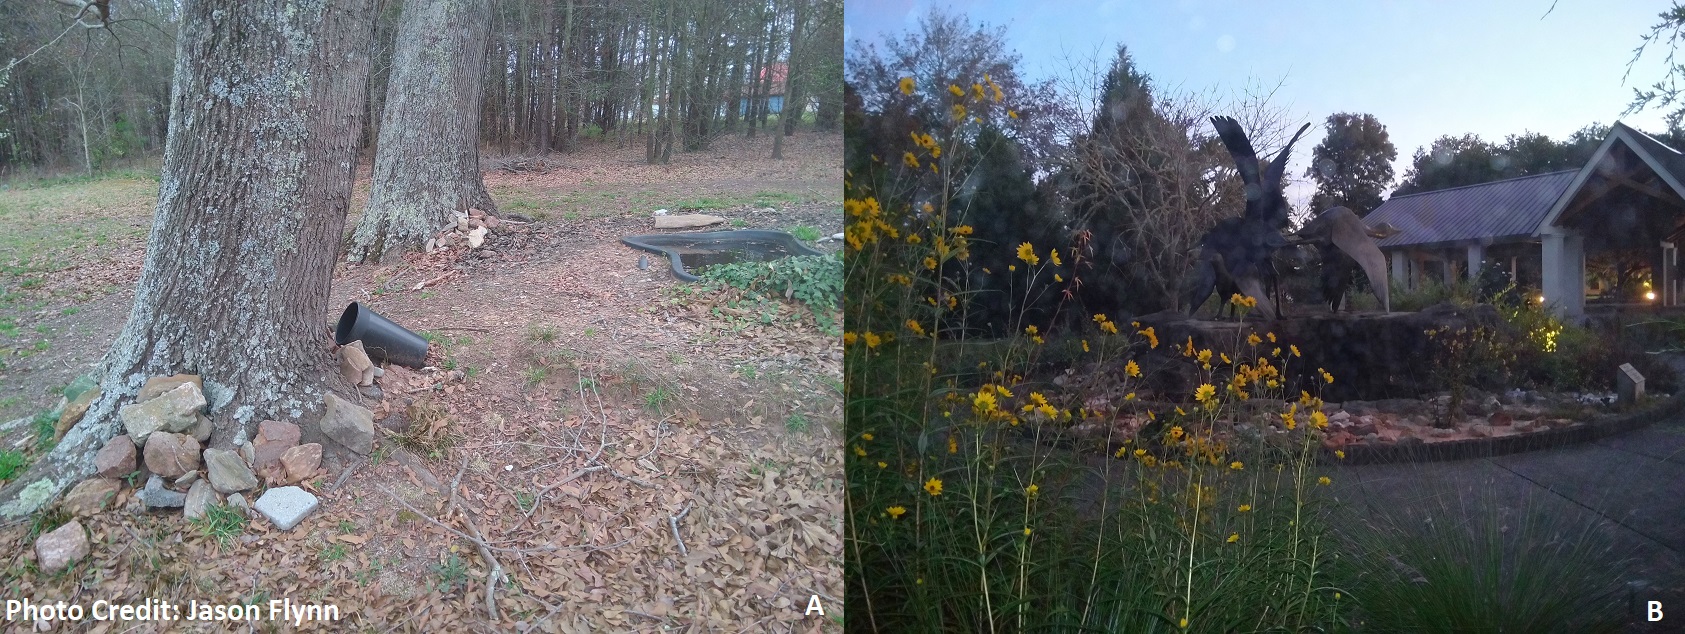 A) A few rocks from the Inner Piedmont from a family member’s former rock garden in Spartanburg that are on display. B) The SC Geologic Garden at the base of the Heron, Grouse, and Loon sculpture with swamp sunflowers in October 2021.